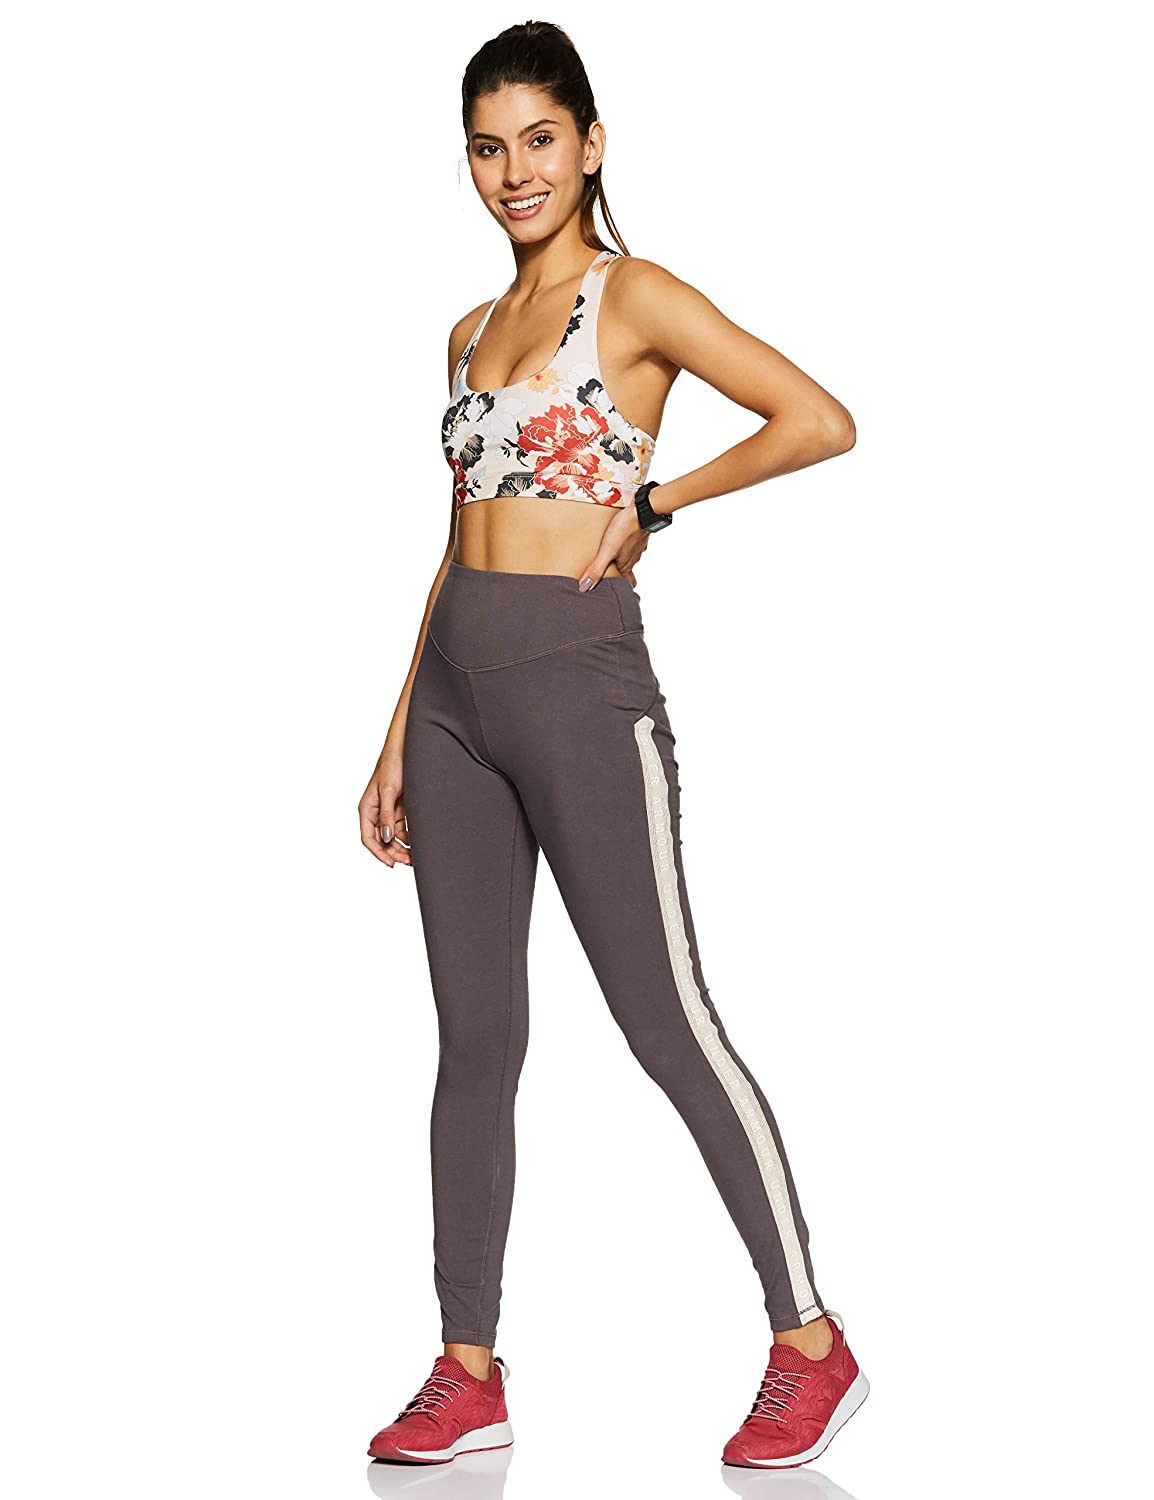 Under Armour's Track pants for women